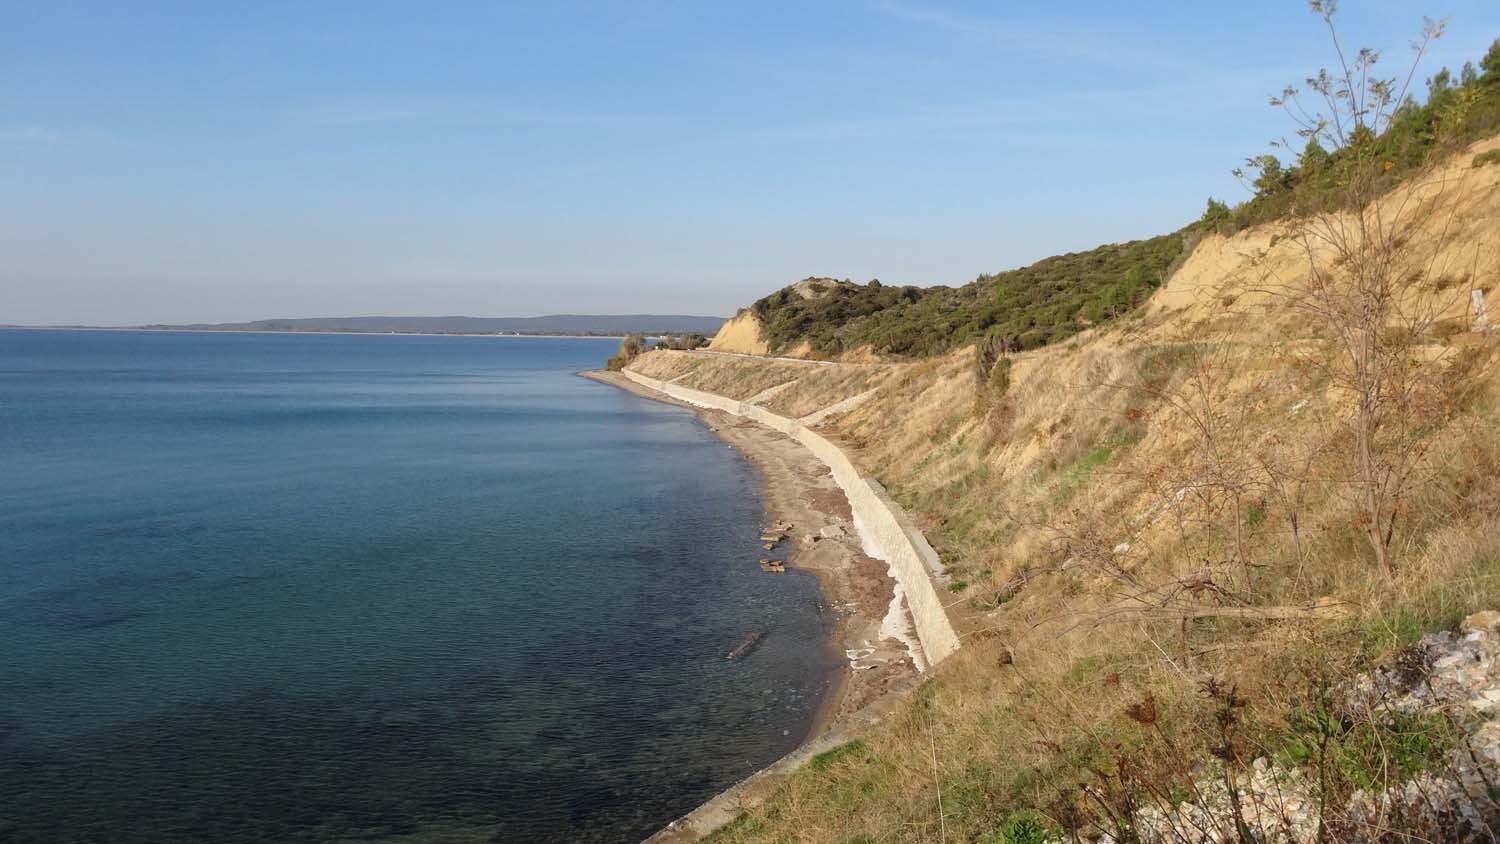 ANZAC Cove - 20,000 troops landed here sustaining 5,000 casualties 